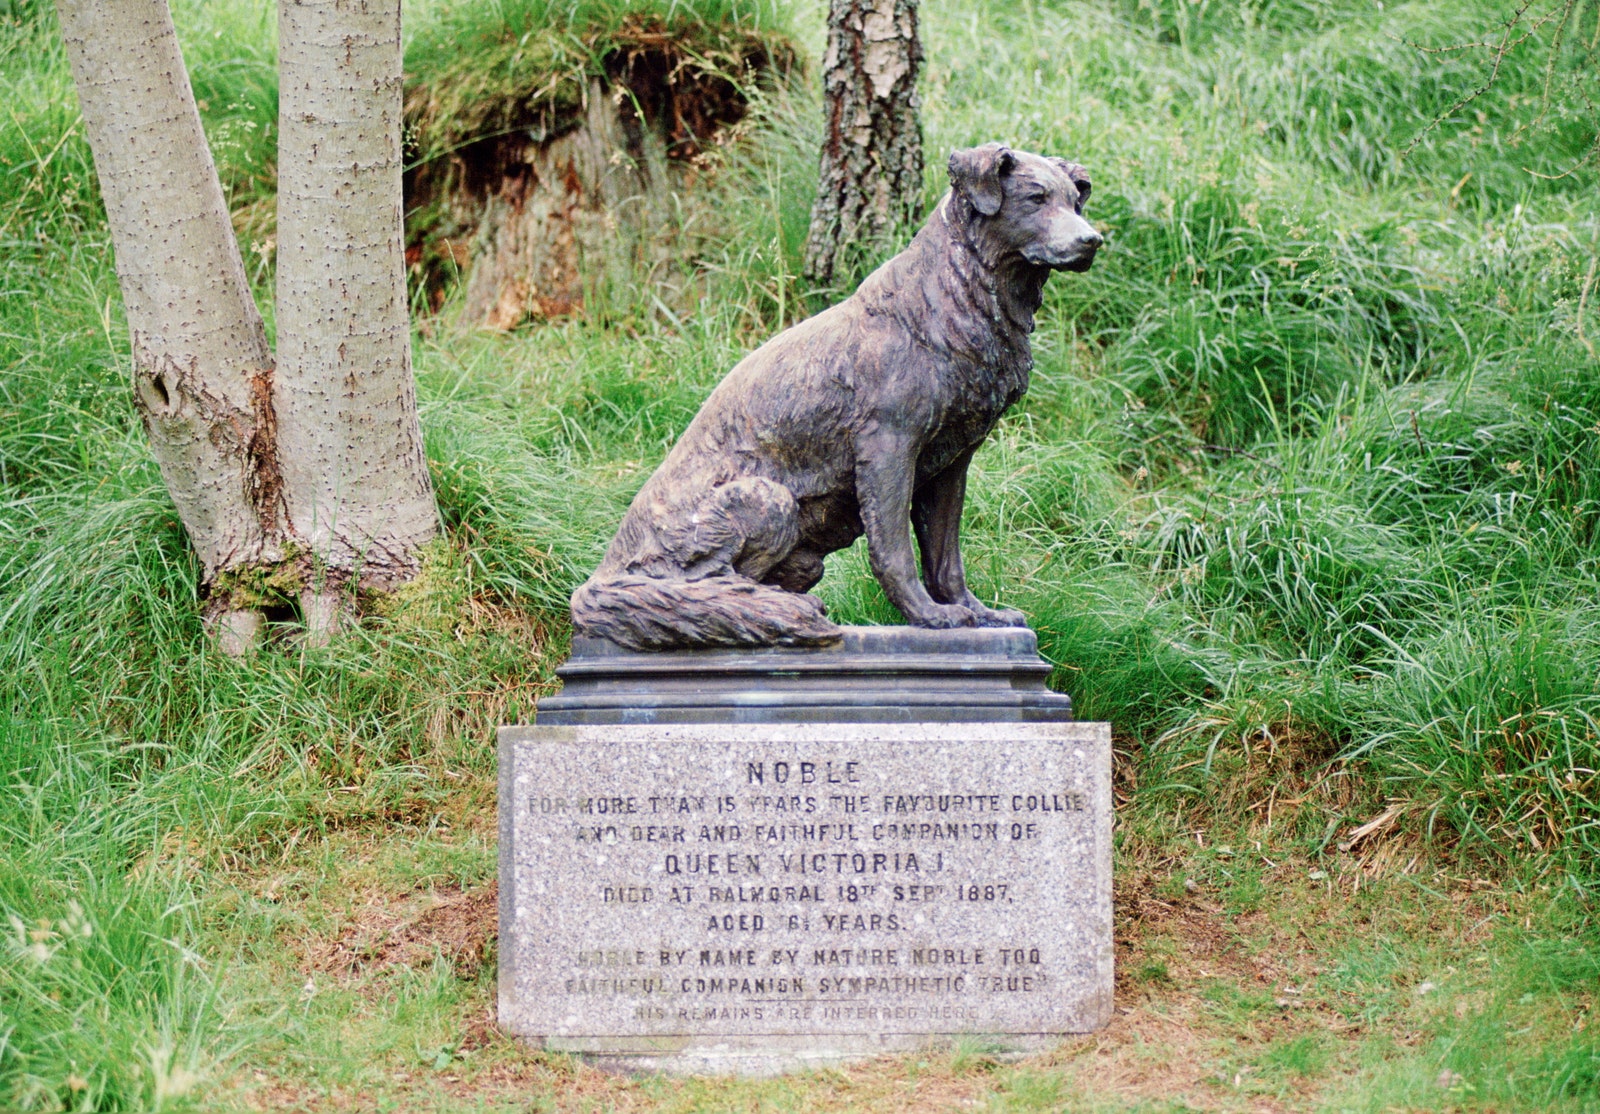 Dog statue among grass a brown rendering of Queen Victorias dog Noble at Balmoral Castle grounds